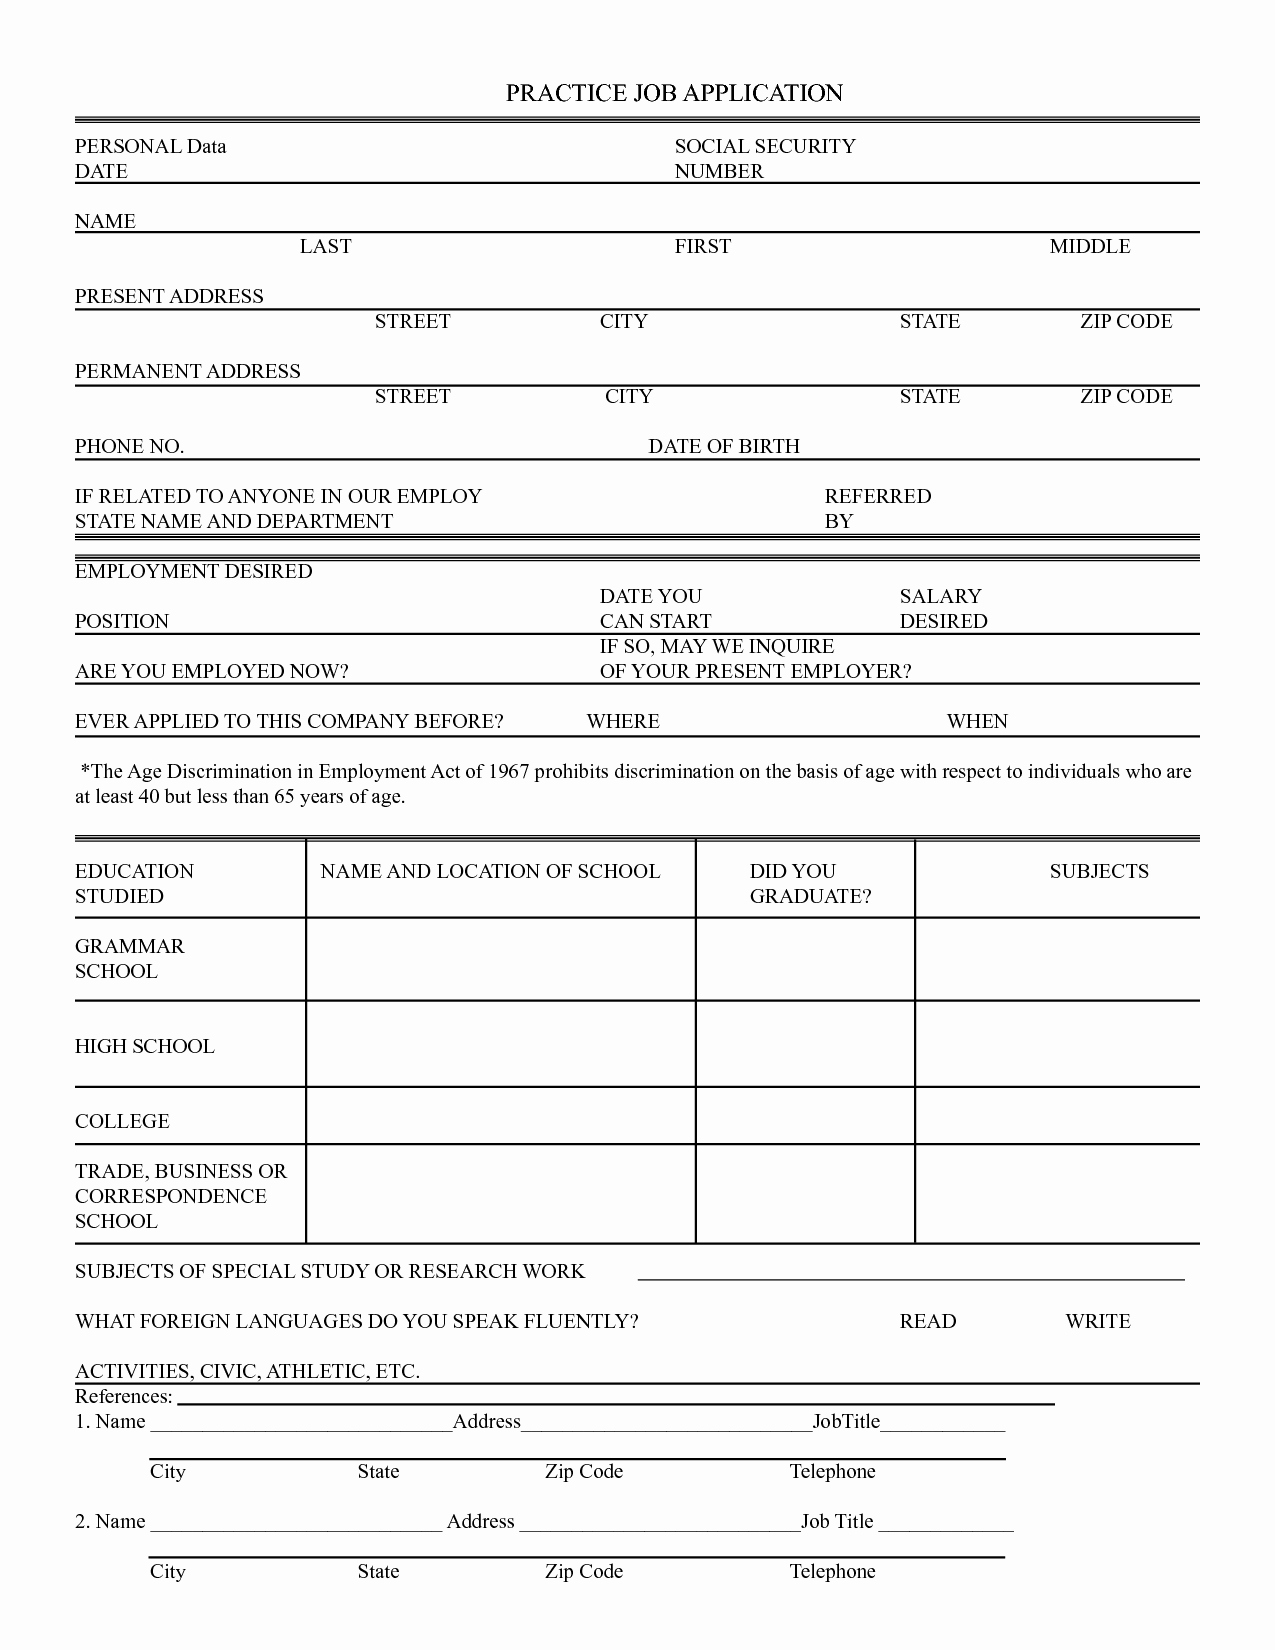 Free Employment Application to Print Best Of Practice Job Application form